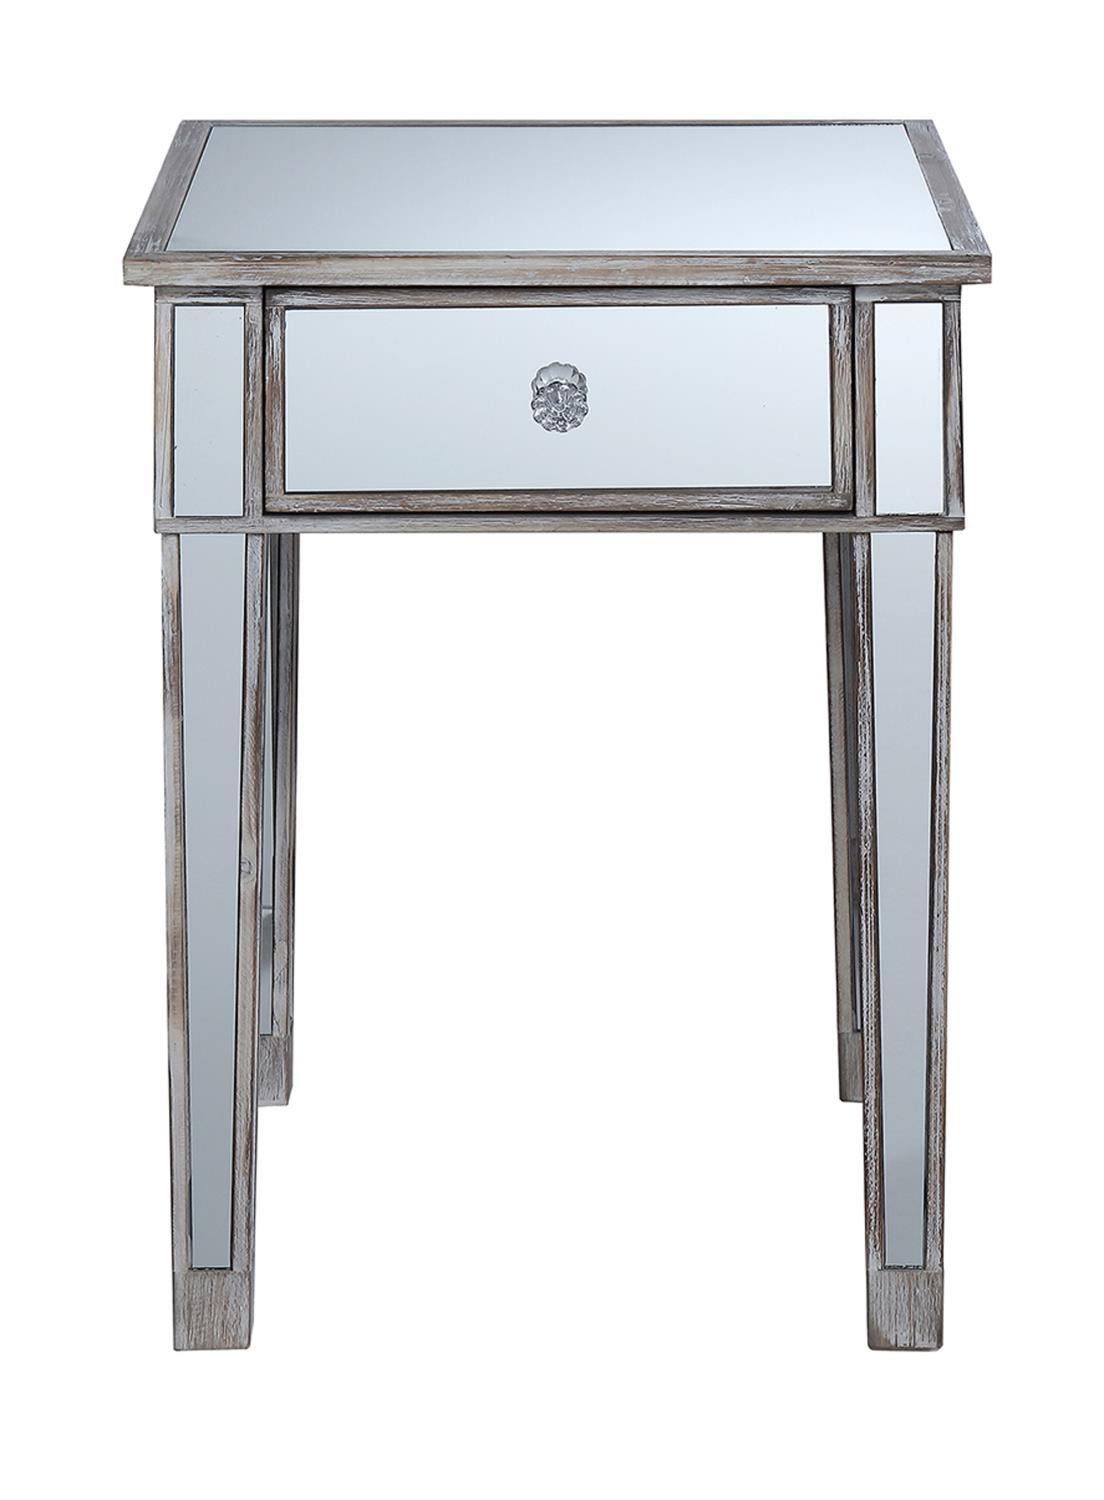 Convenience Concepts Gold Coast Mirrored 1 Drawer End Table U12-181